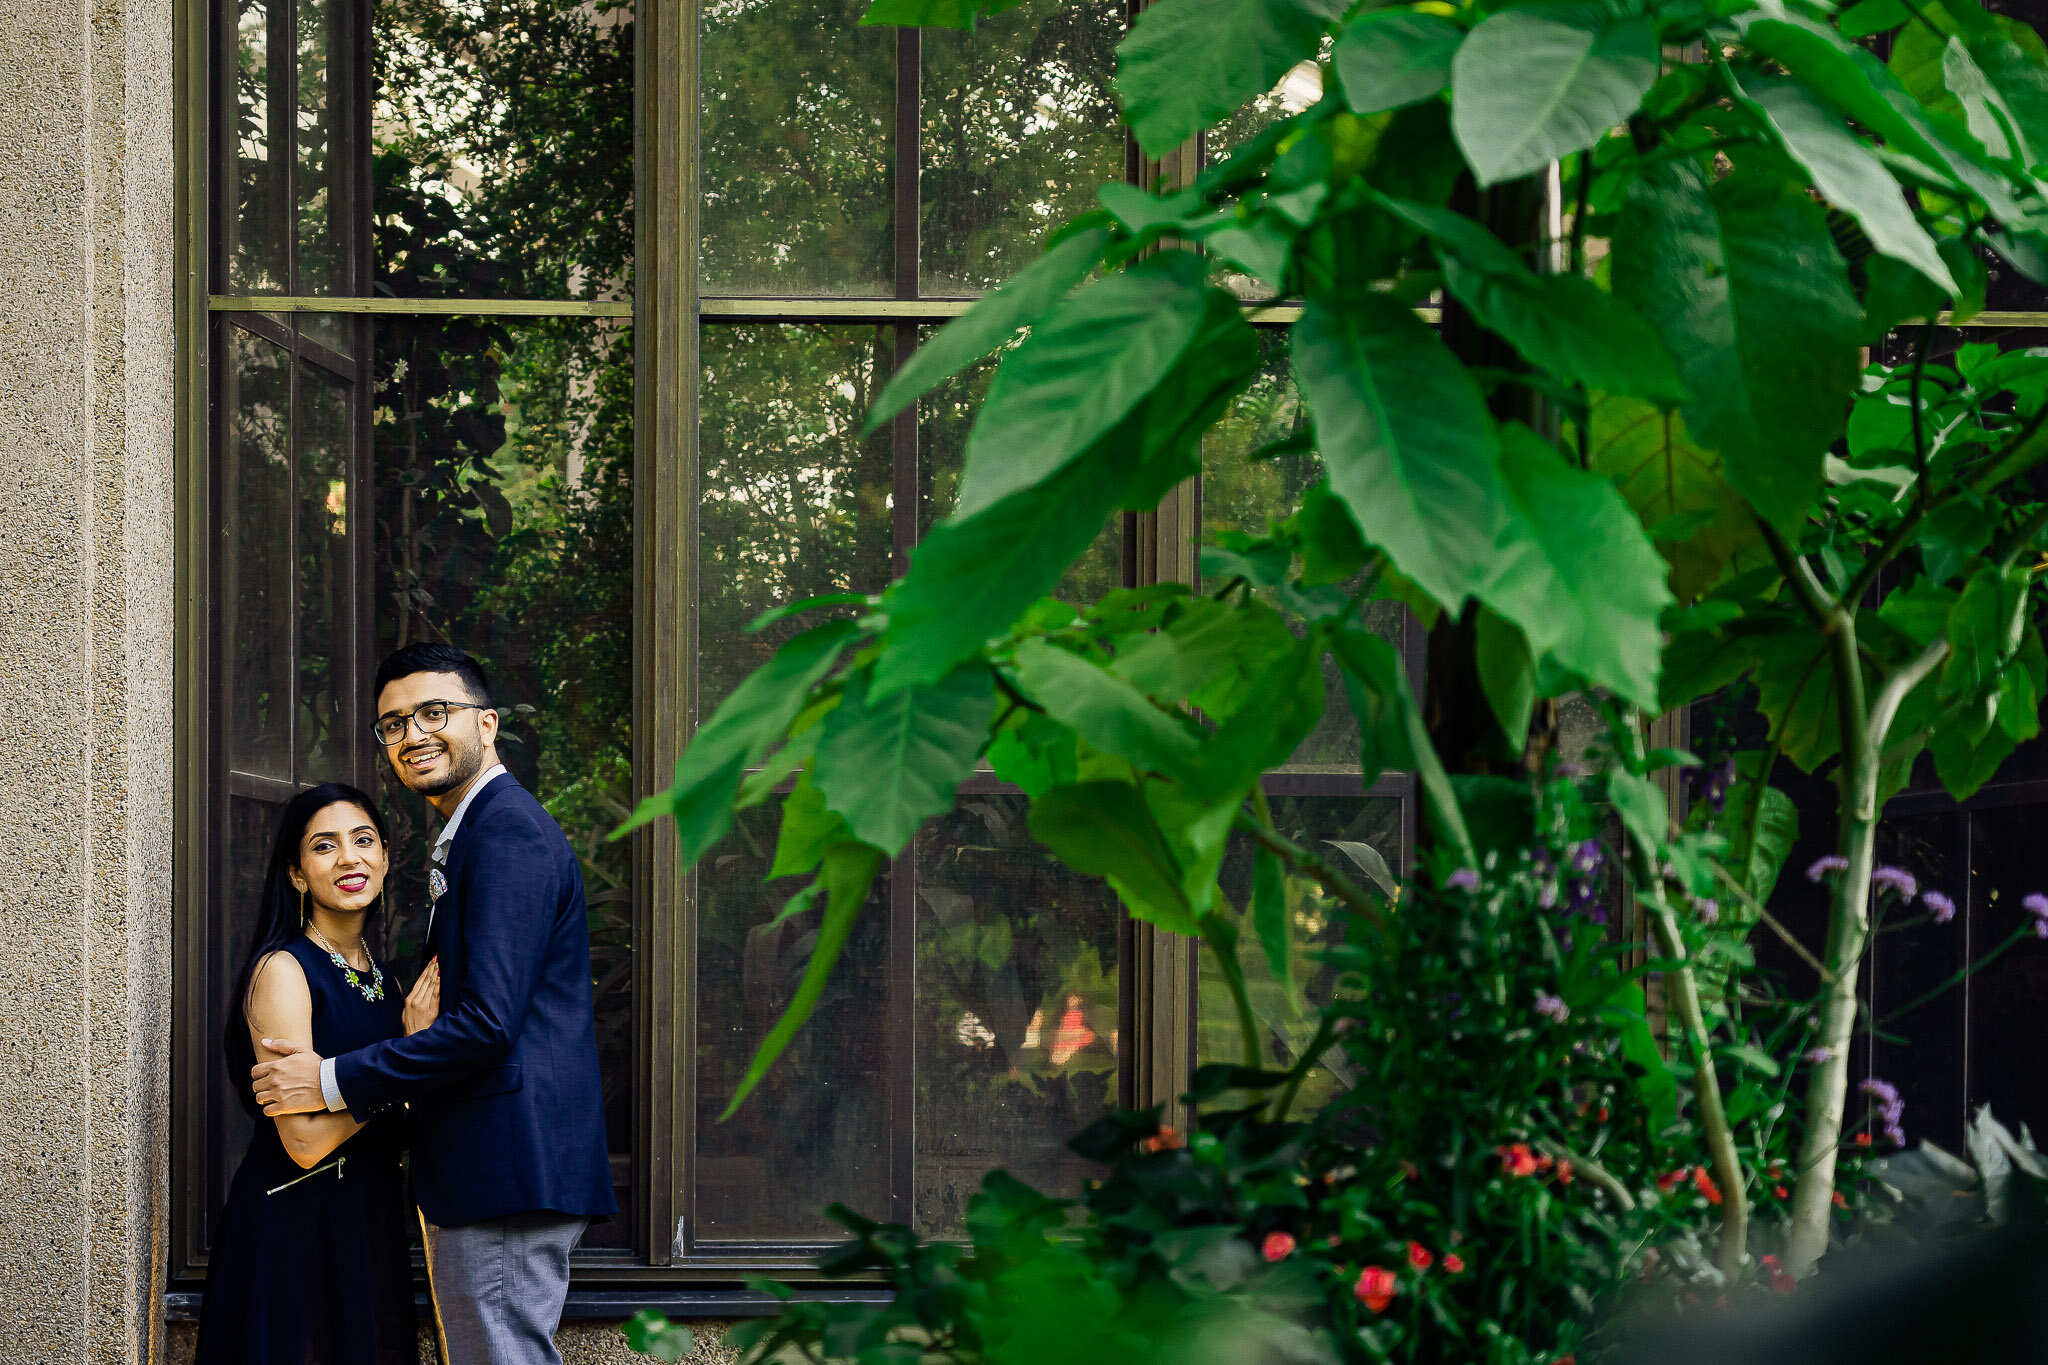 ENGAGEMENT SESSION AT LONGWOOD GARDENS